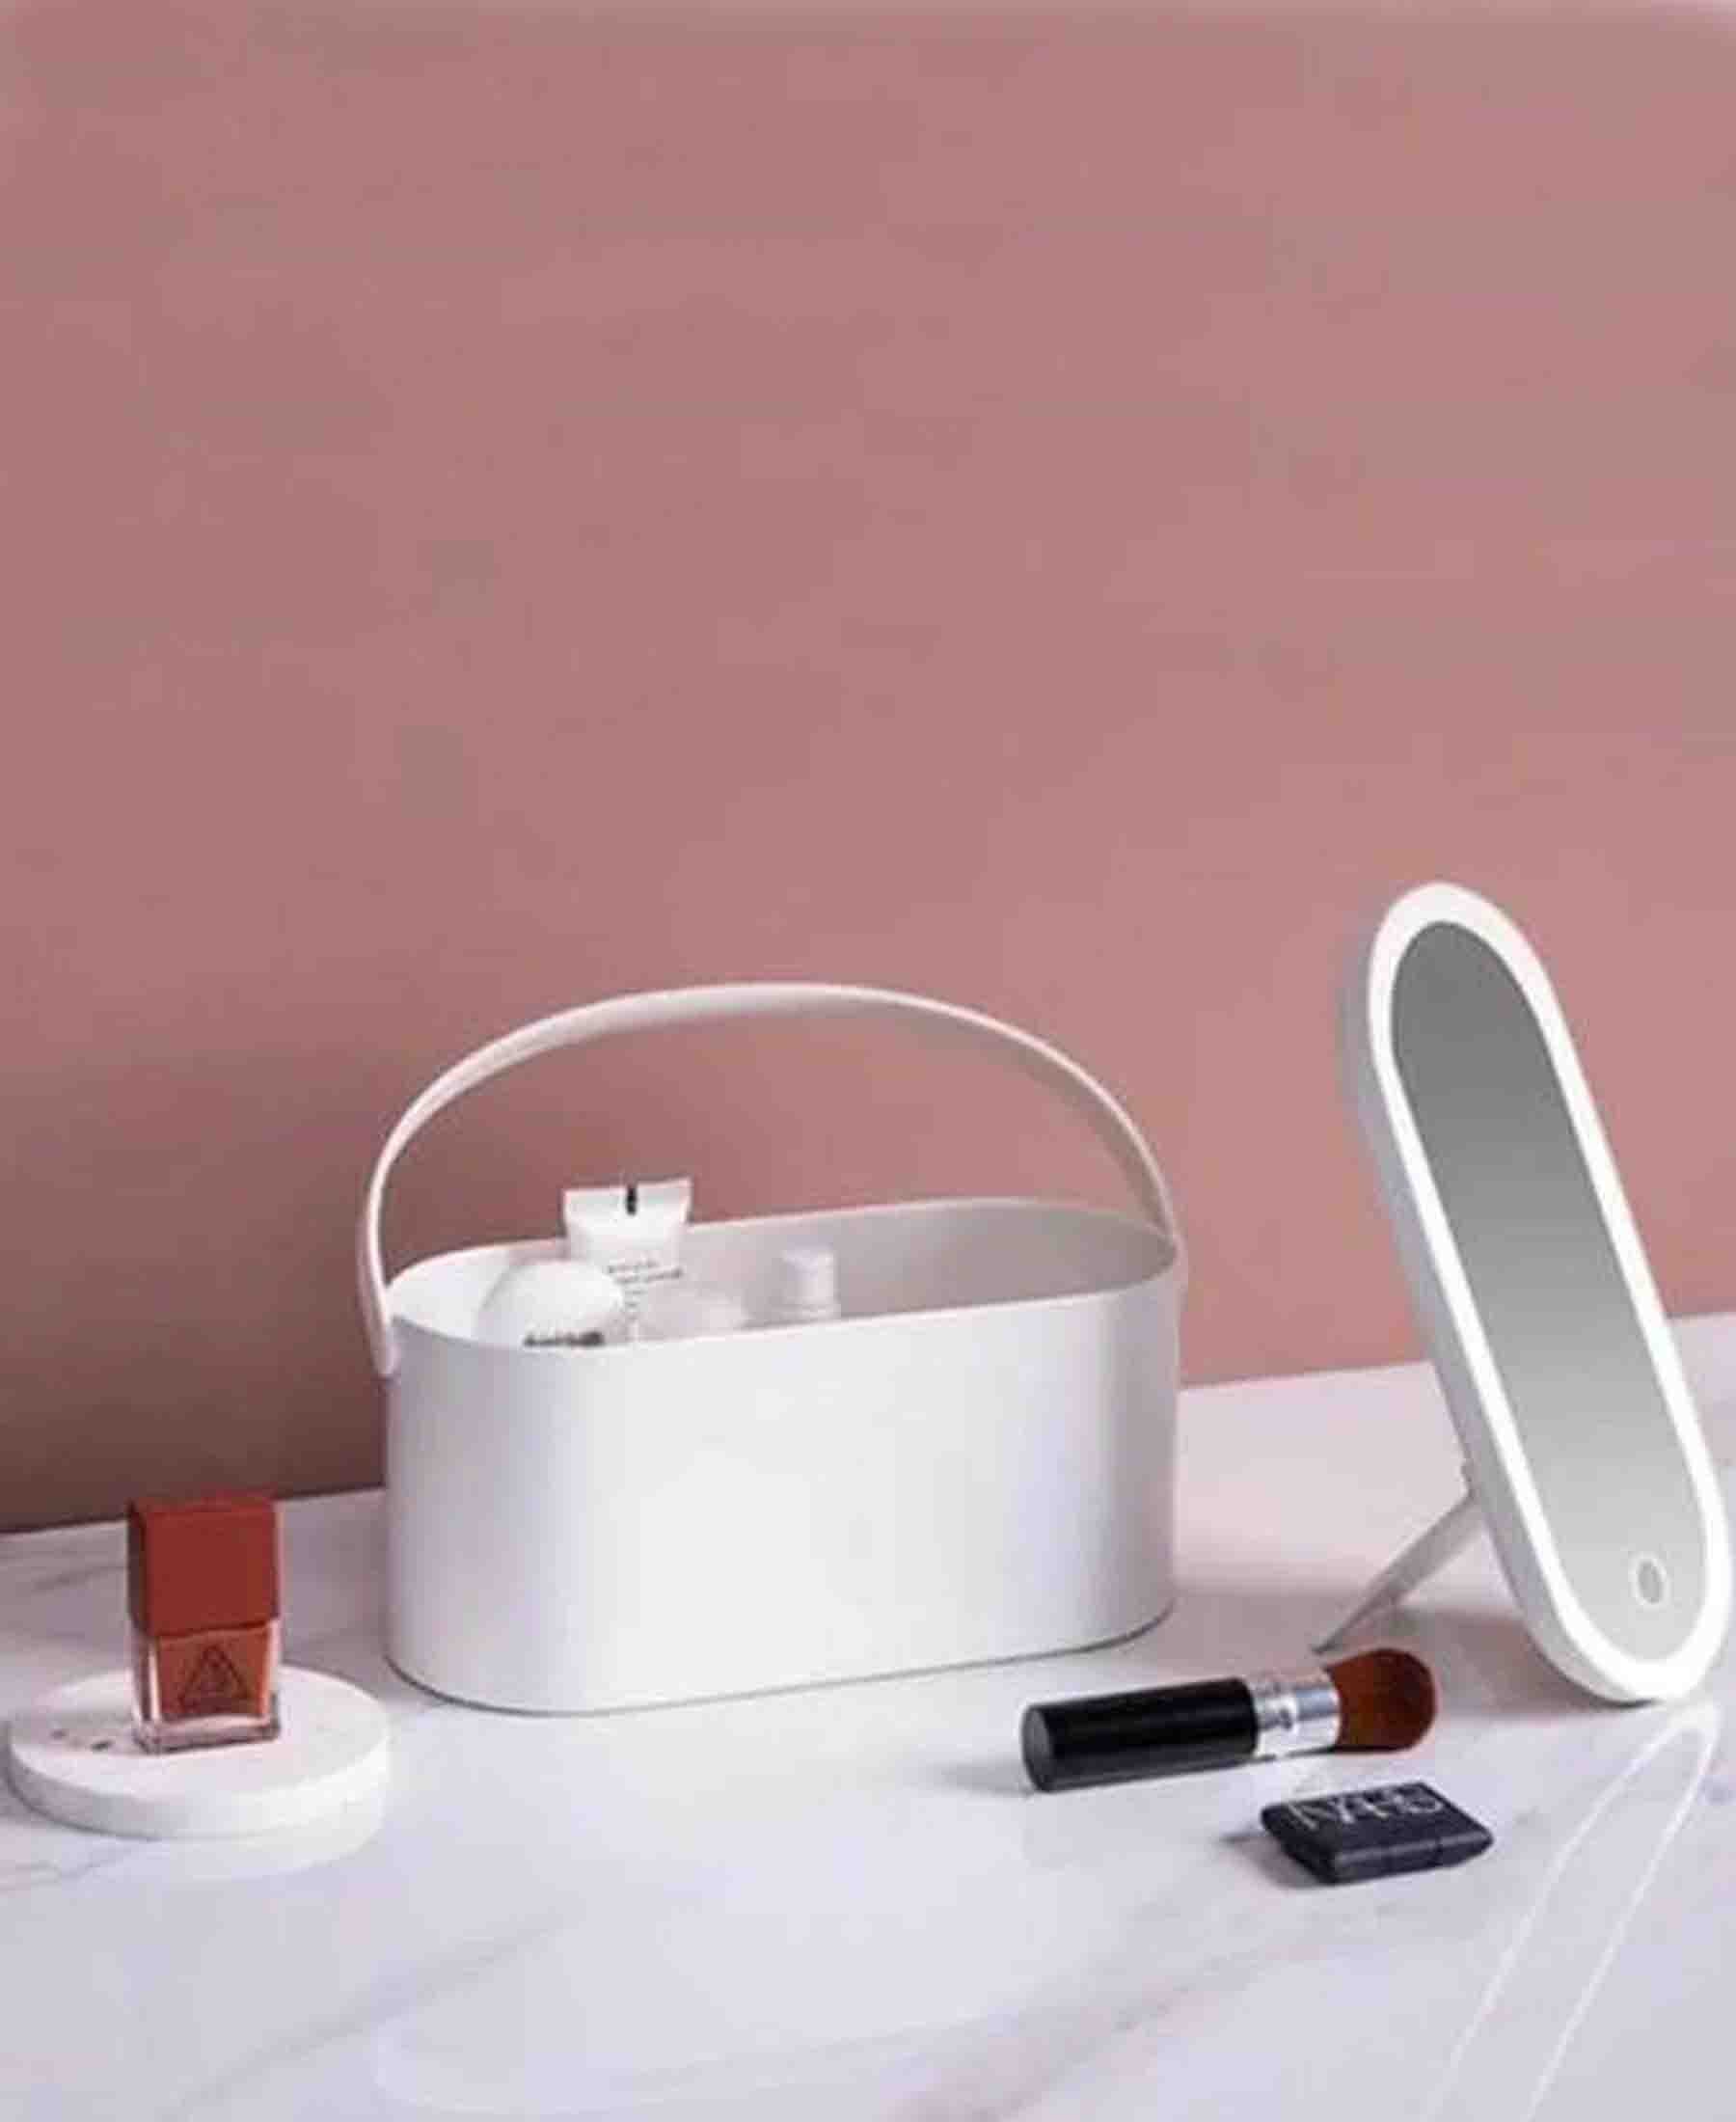 3 in 1 Makeup Storage With Mirror & LED Light - White